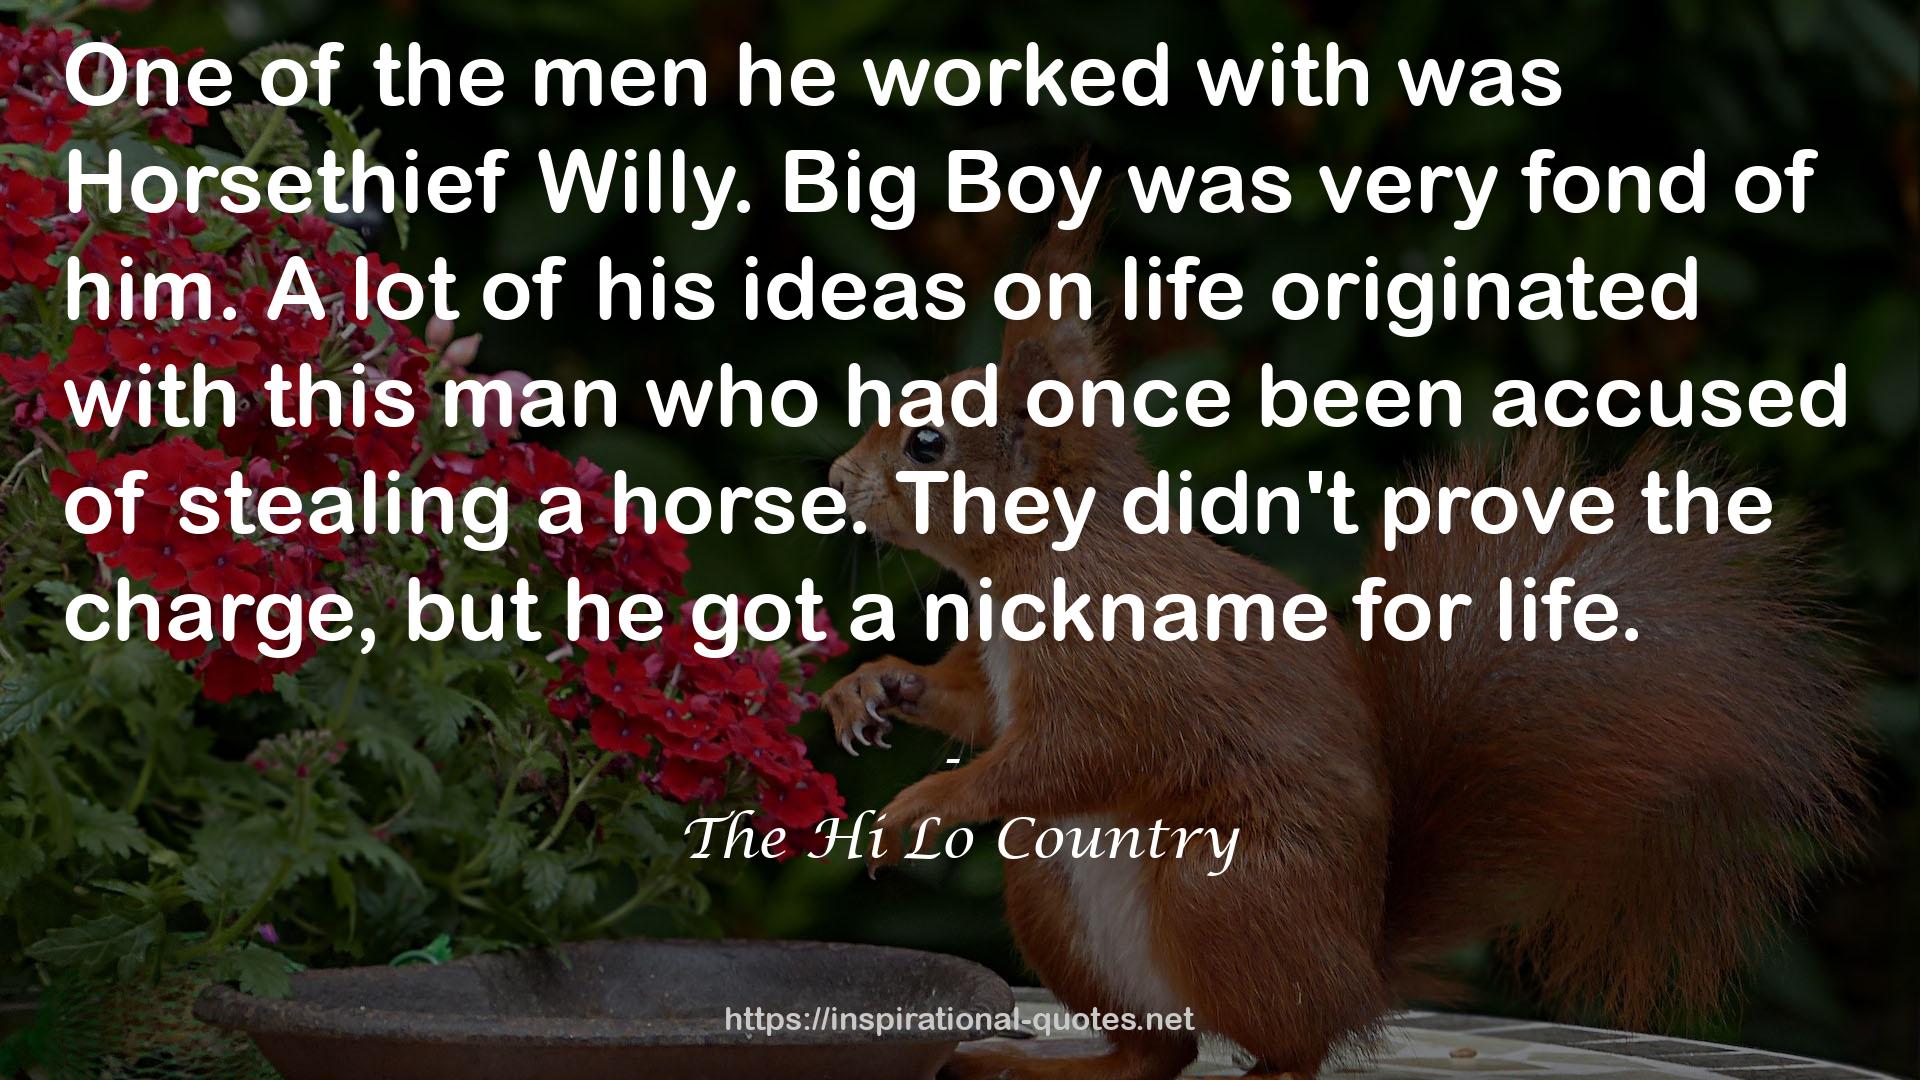 The Hi Lo Country QUOTES